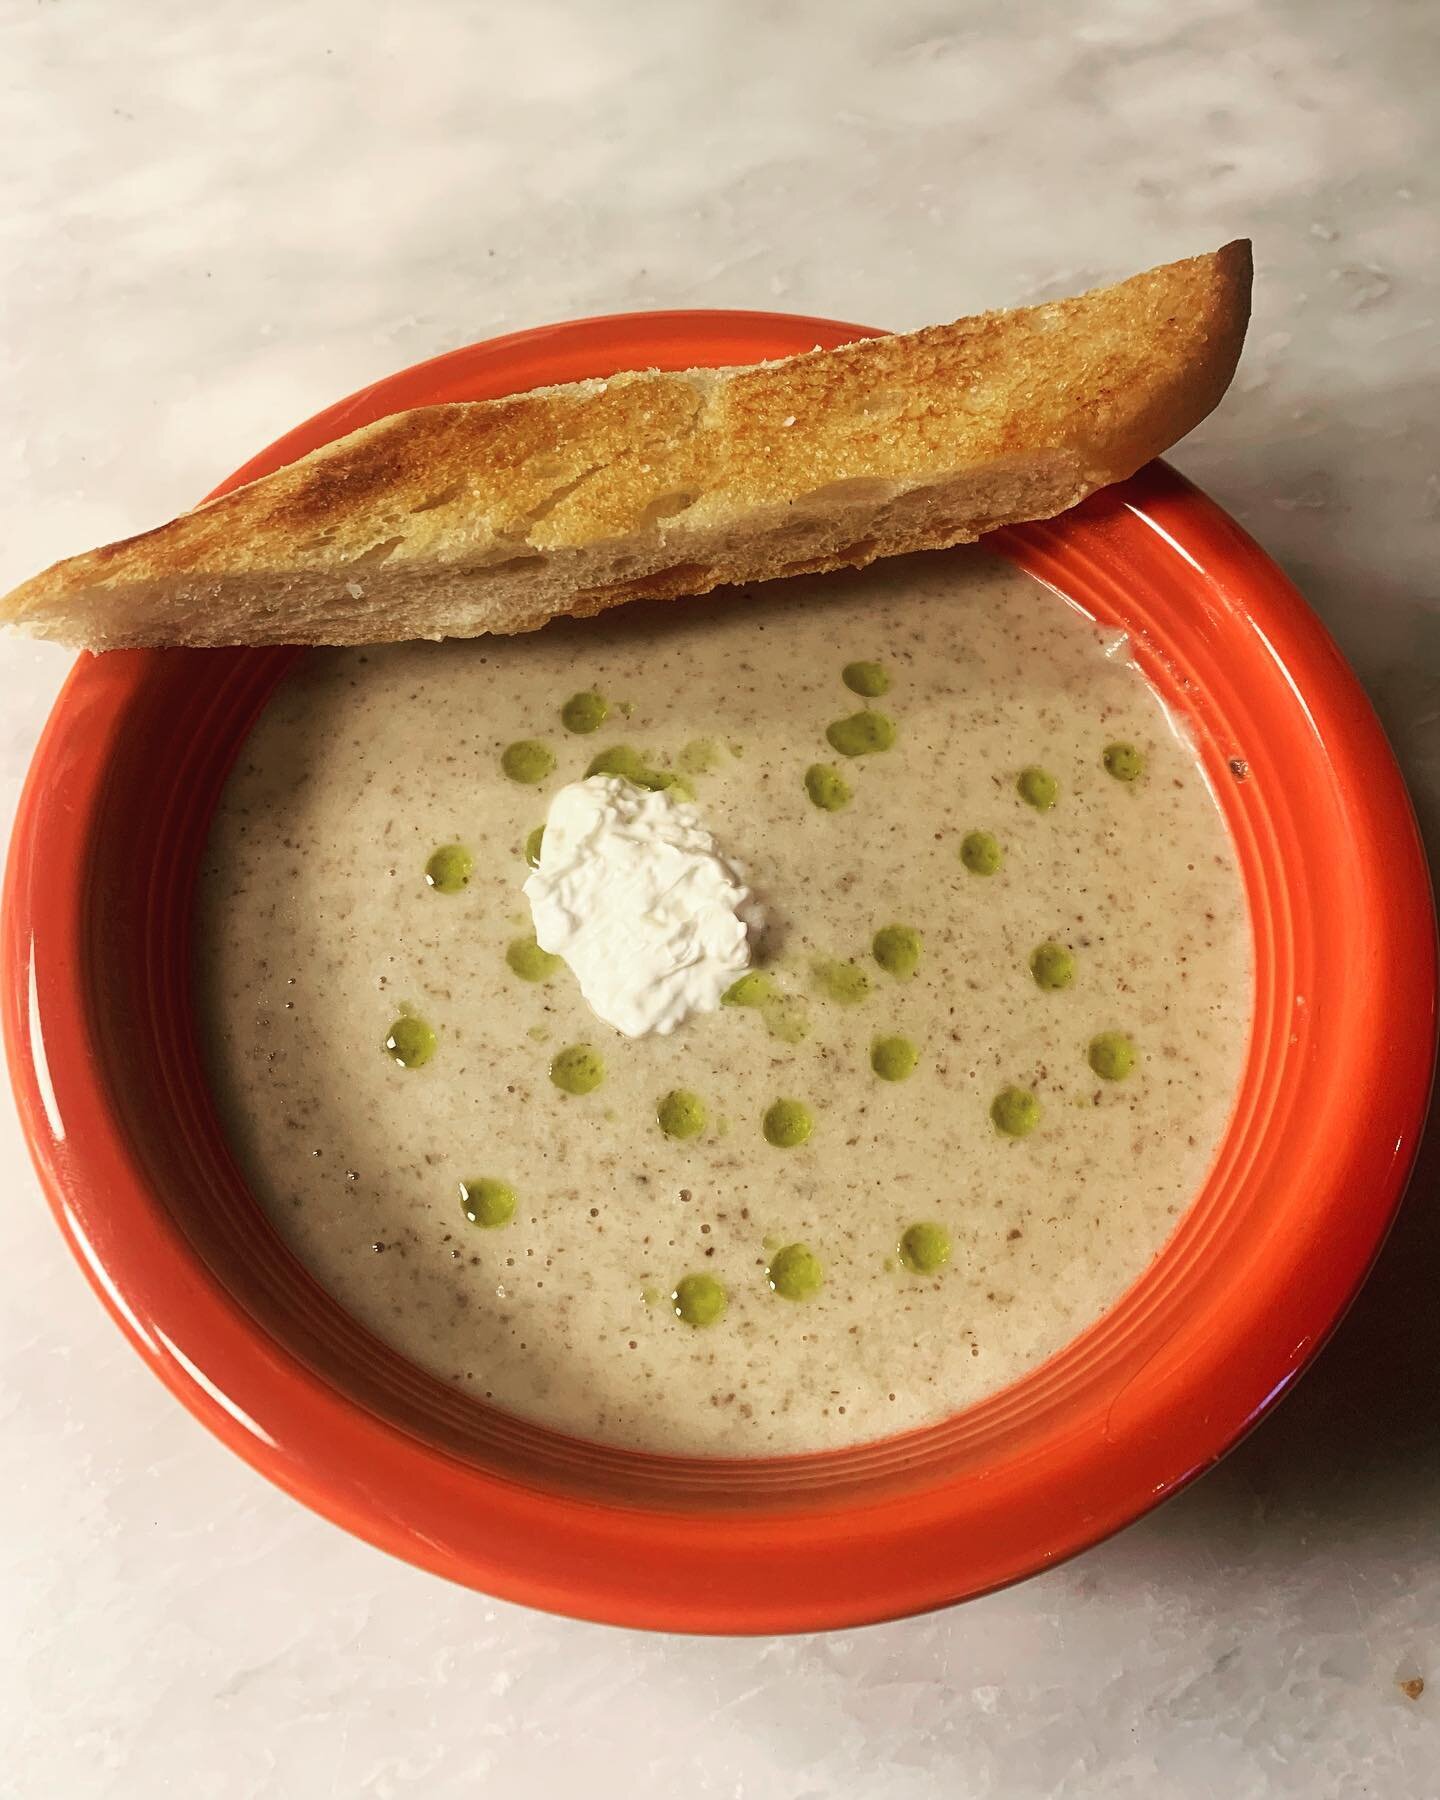 #keepitsimplesunday creamy mushroom soup 
Made with @primordiafoods shrooms, @pigeon.creek.farm cream line milk, a drizzle of @getgraza extra virgin olive oil, and fromage blanc dollop courtesy of @milkhousecheese because I couldn&rsquo;t not. A cros